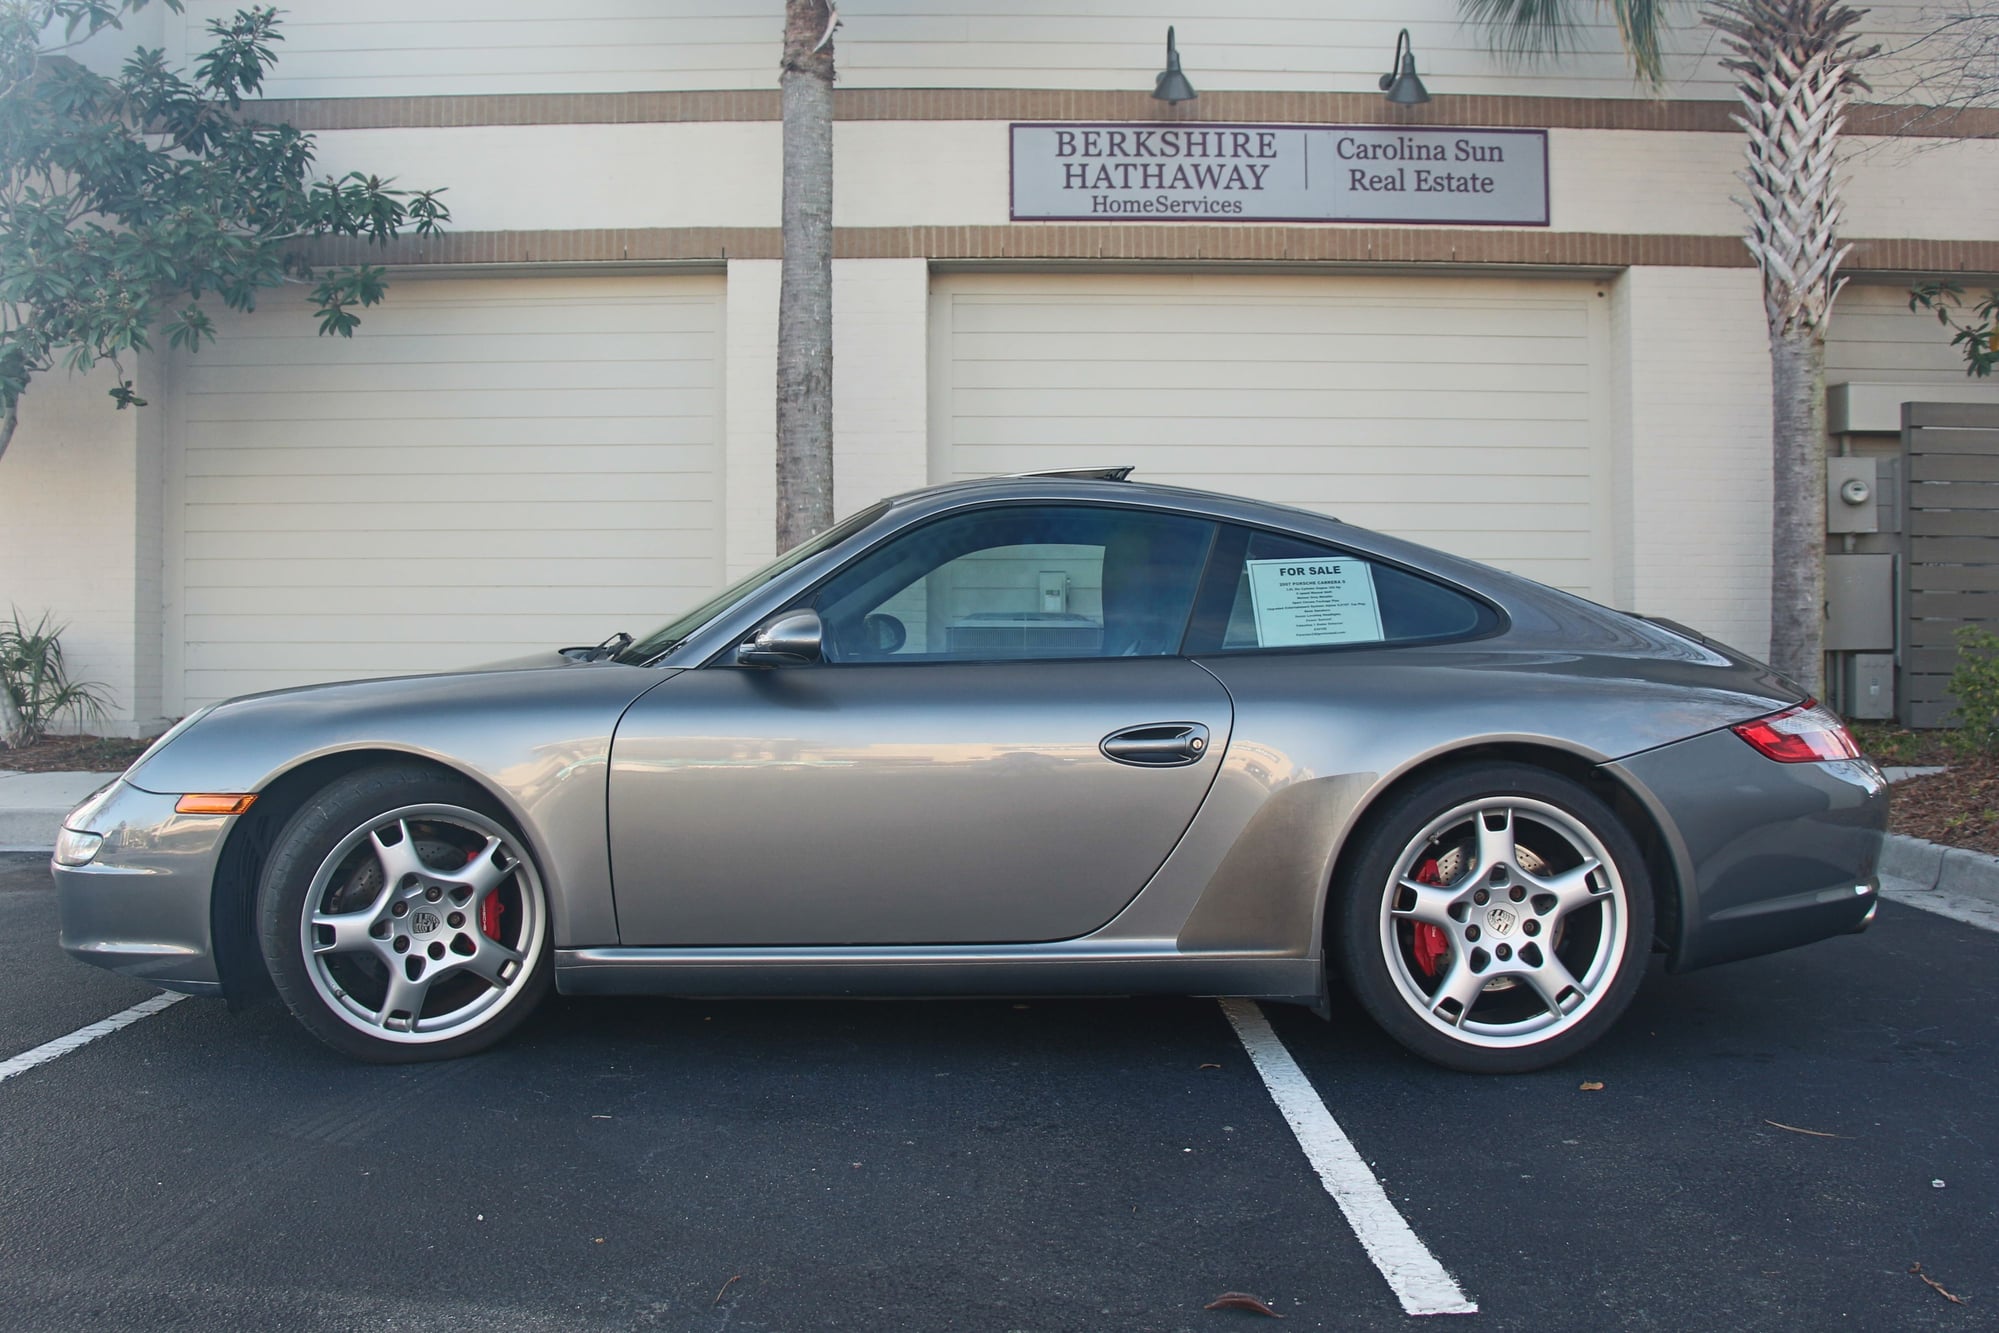 2007 Porsche 911 -  - Used - VIN WPOAB29947S731427 - 84,750 Miles - 6 cyl - 2WD - Manual - Coupe - Gray - Mt Pleasant, SC 29464, United States